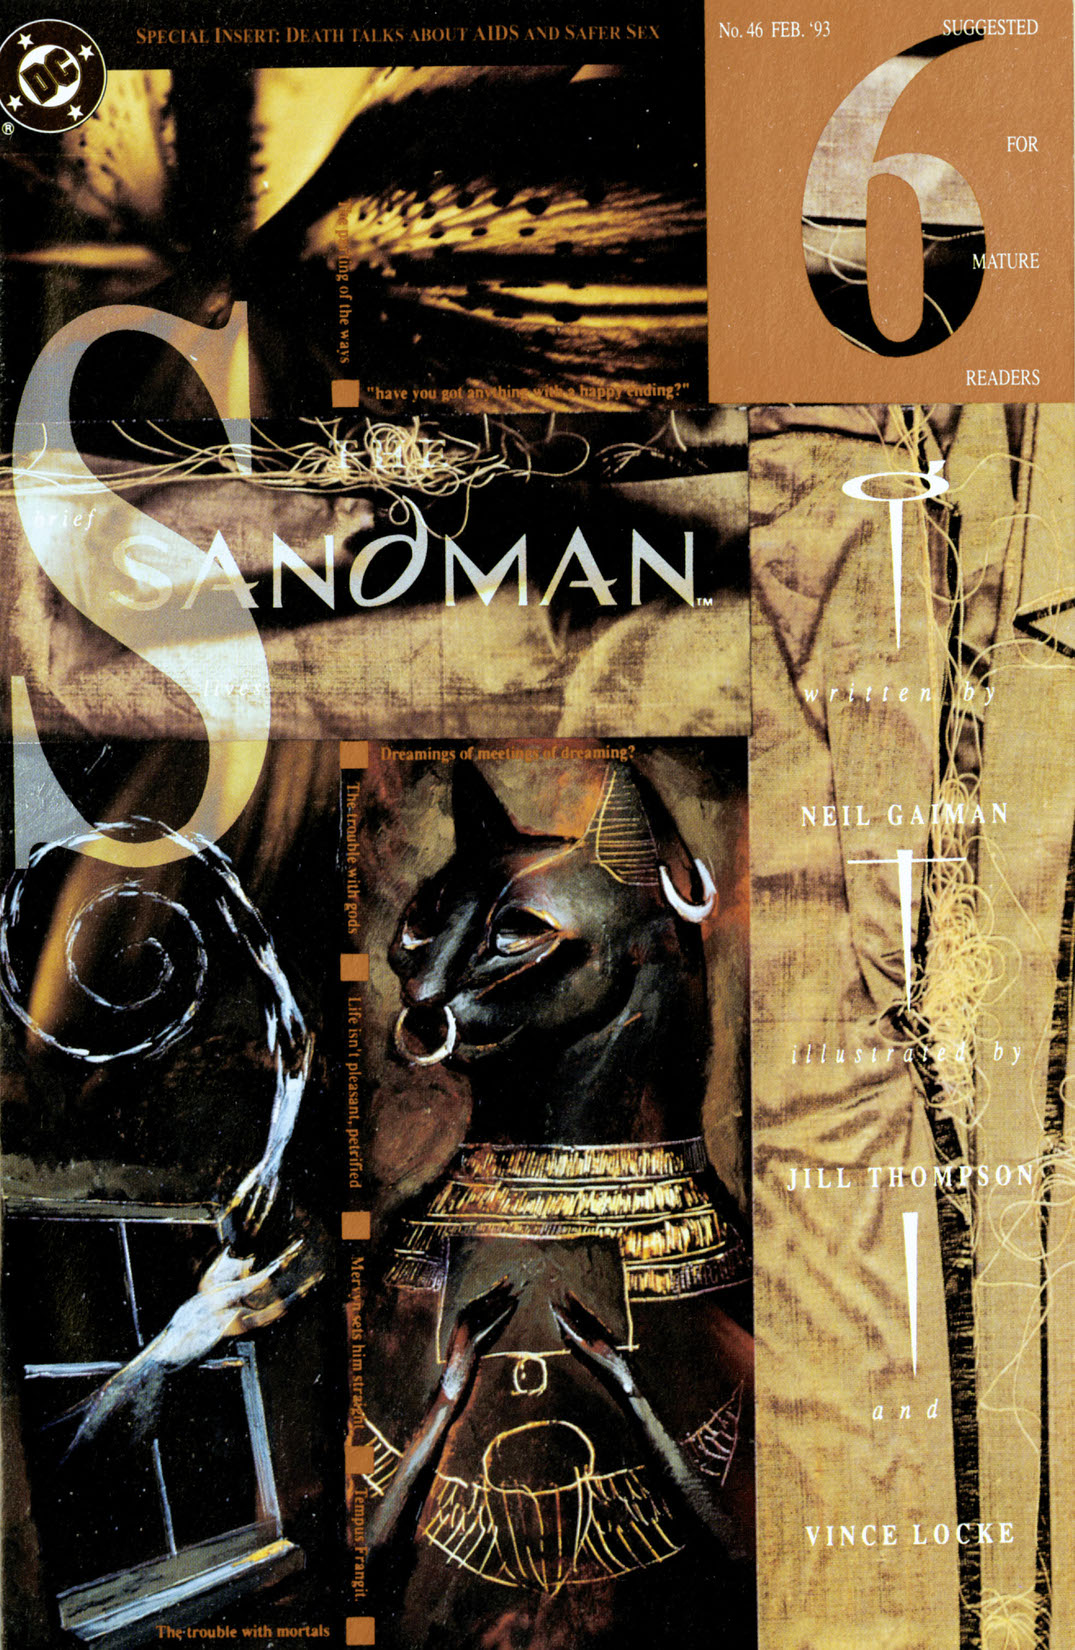 The Sandman #46 preview images